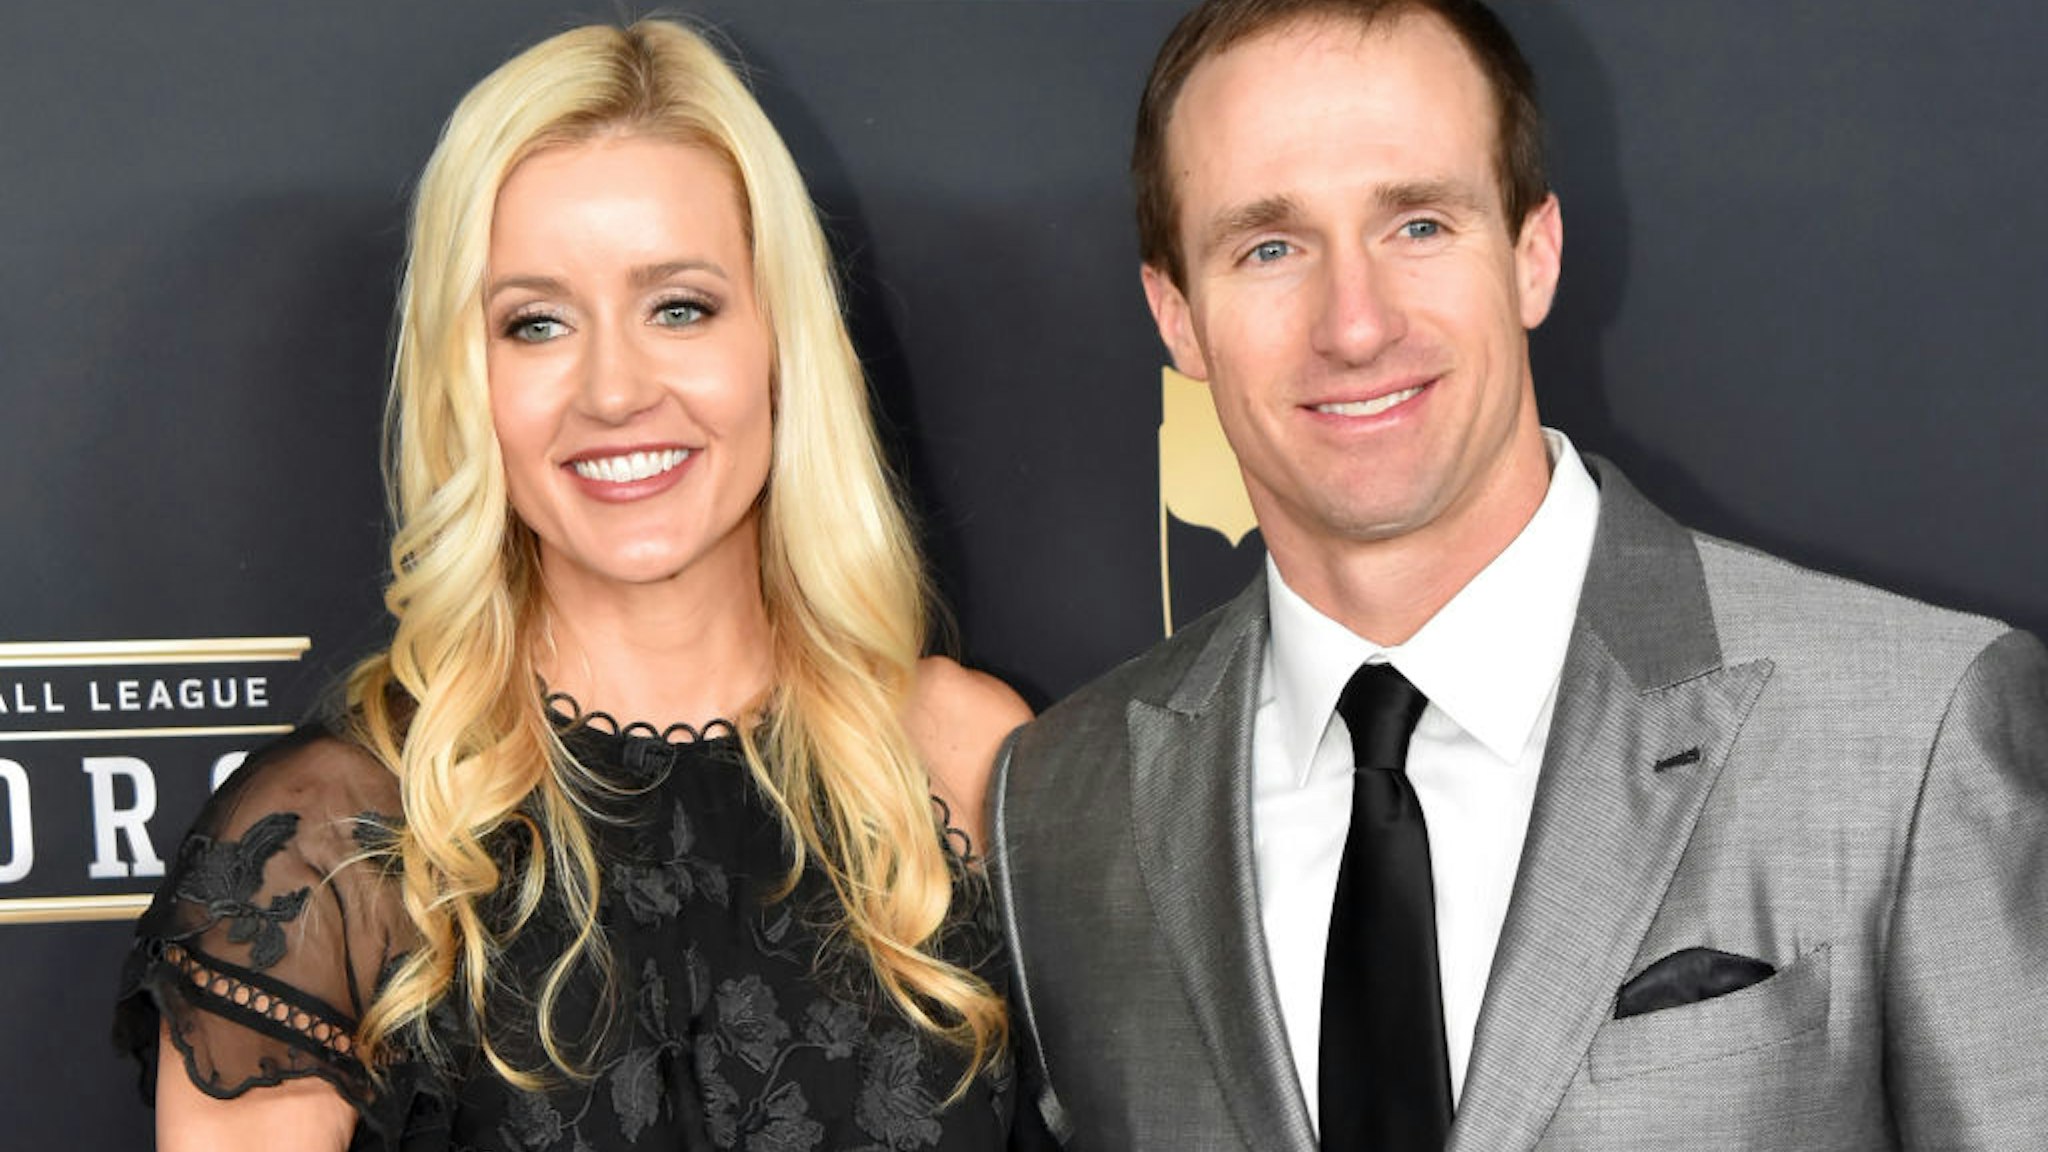 Brittany Brees and NFL Player Drew Brees attends the NFL Honors at University of Minnesota on February 3, 2018 in Minneapolis, Minnesota.